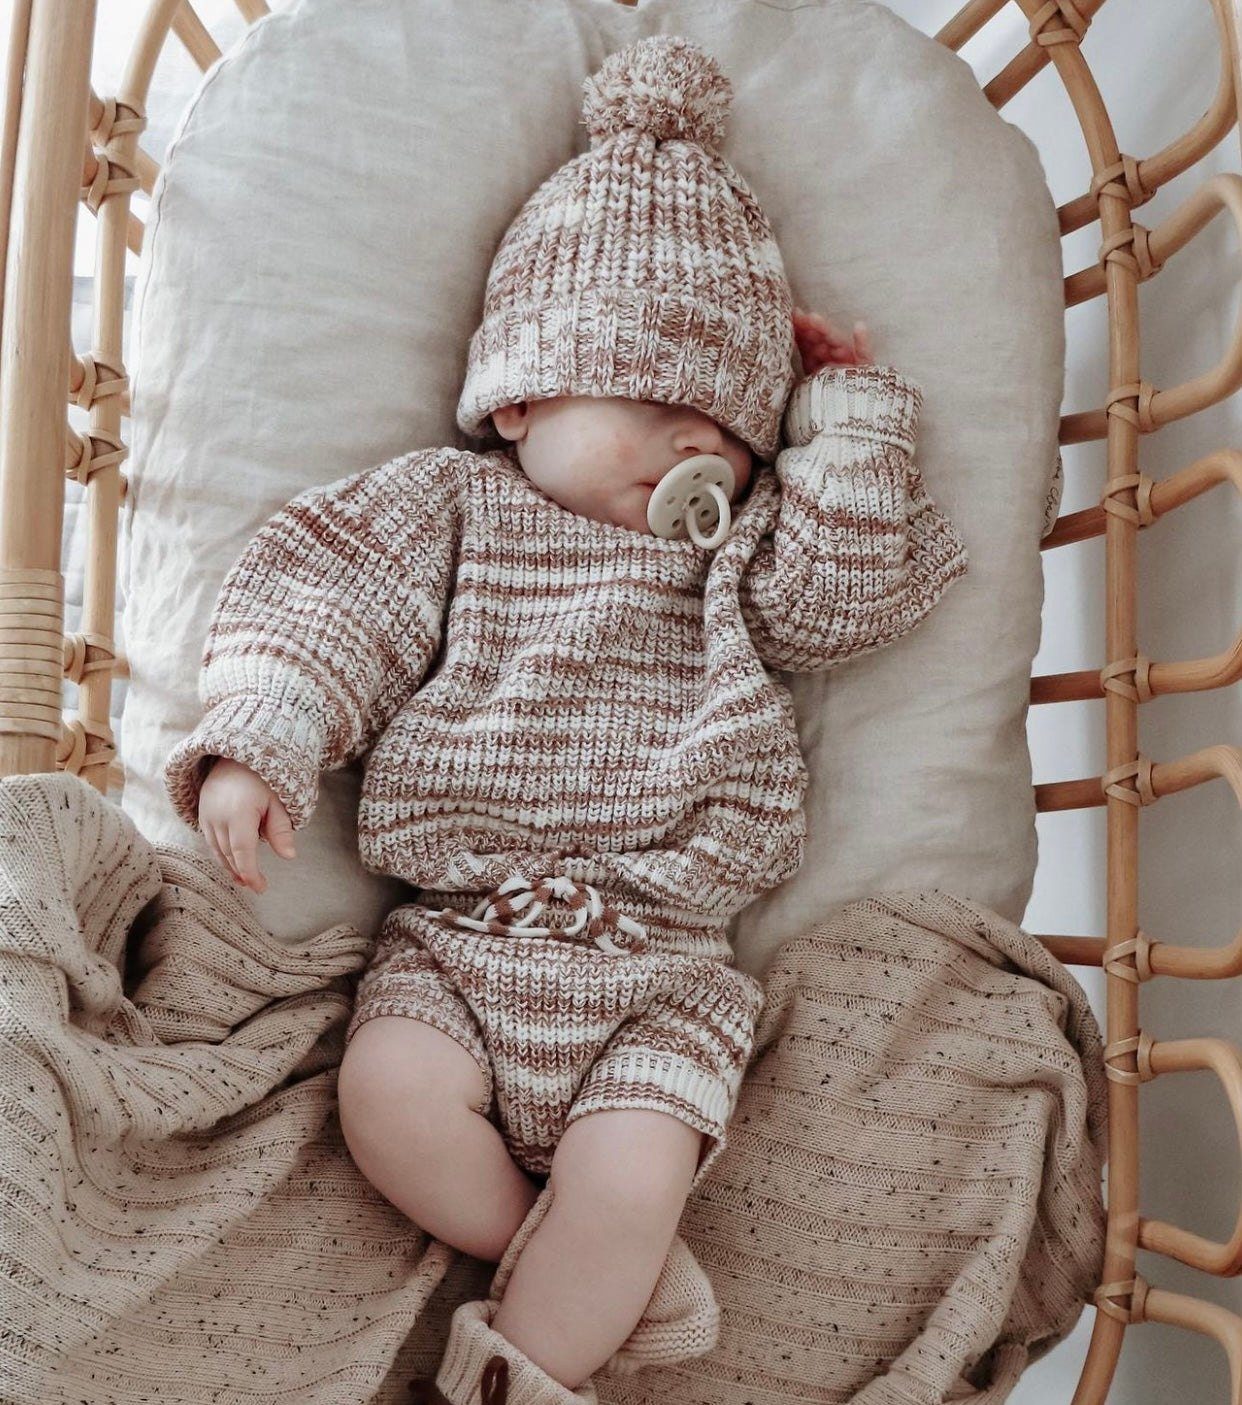 Newborn Knitted Outfit | Sweater & Bloomer Set | Brave Little Lamb